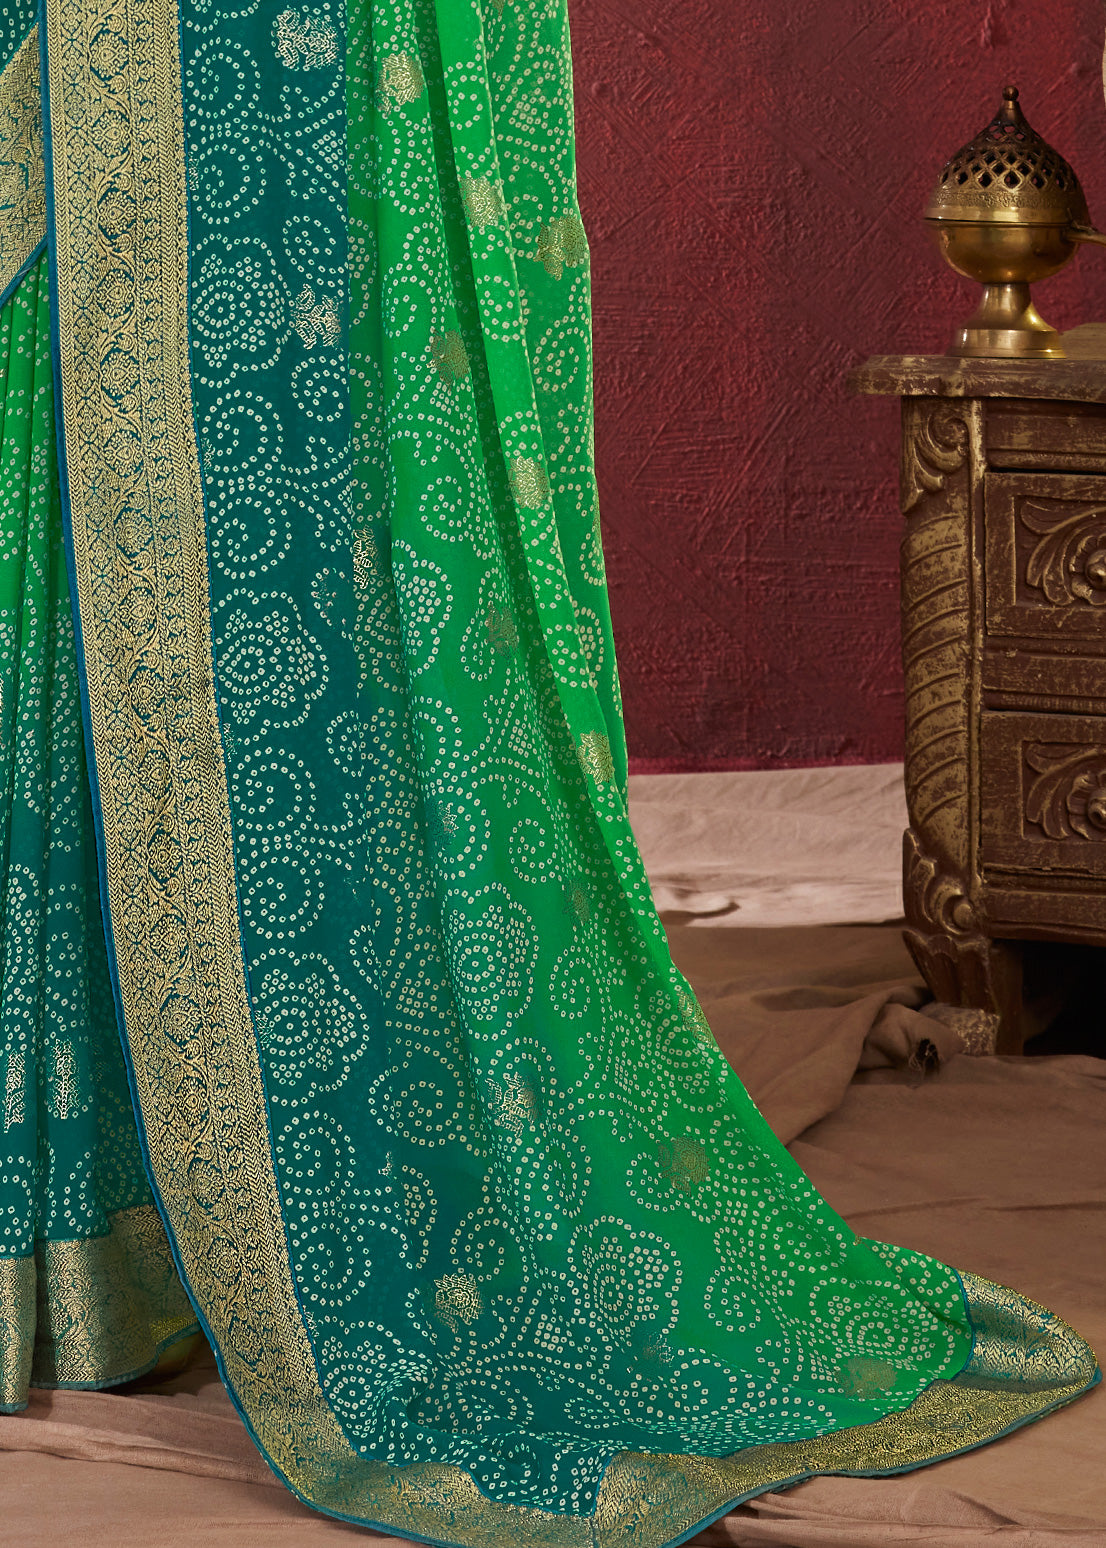 Dual Shades Bandhani Printed Dark Green Sea Green Weightless Georgette Saree With Embroidery Lace